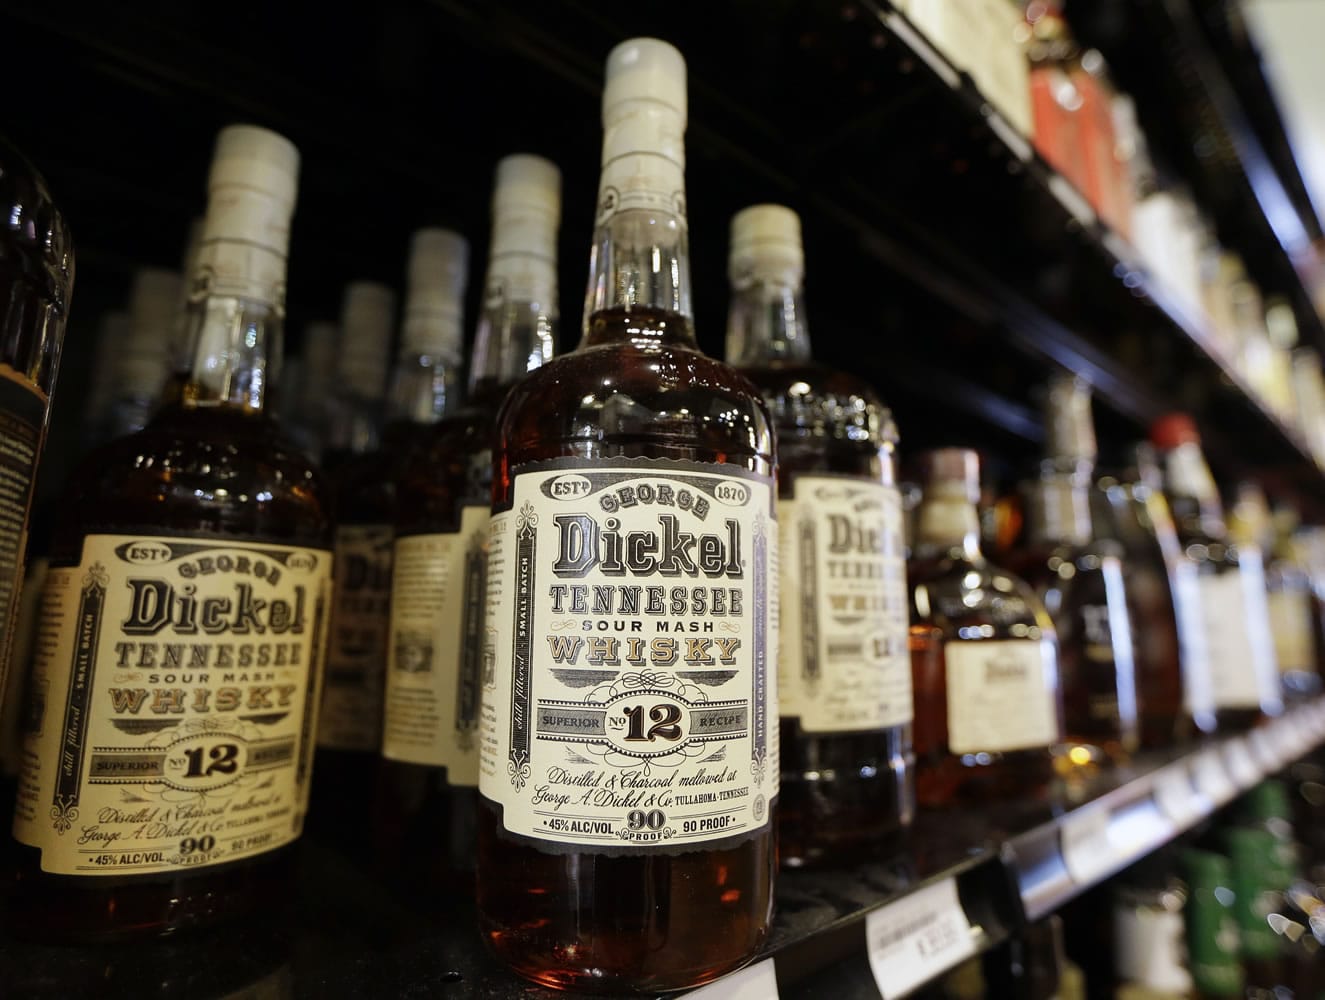 Bottles of George Dickel Tennessee whiskey are displayed in a liquor store Tuesday in Nashville, Tenn.